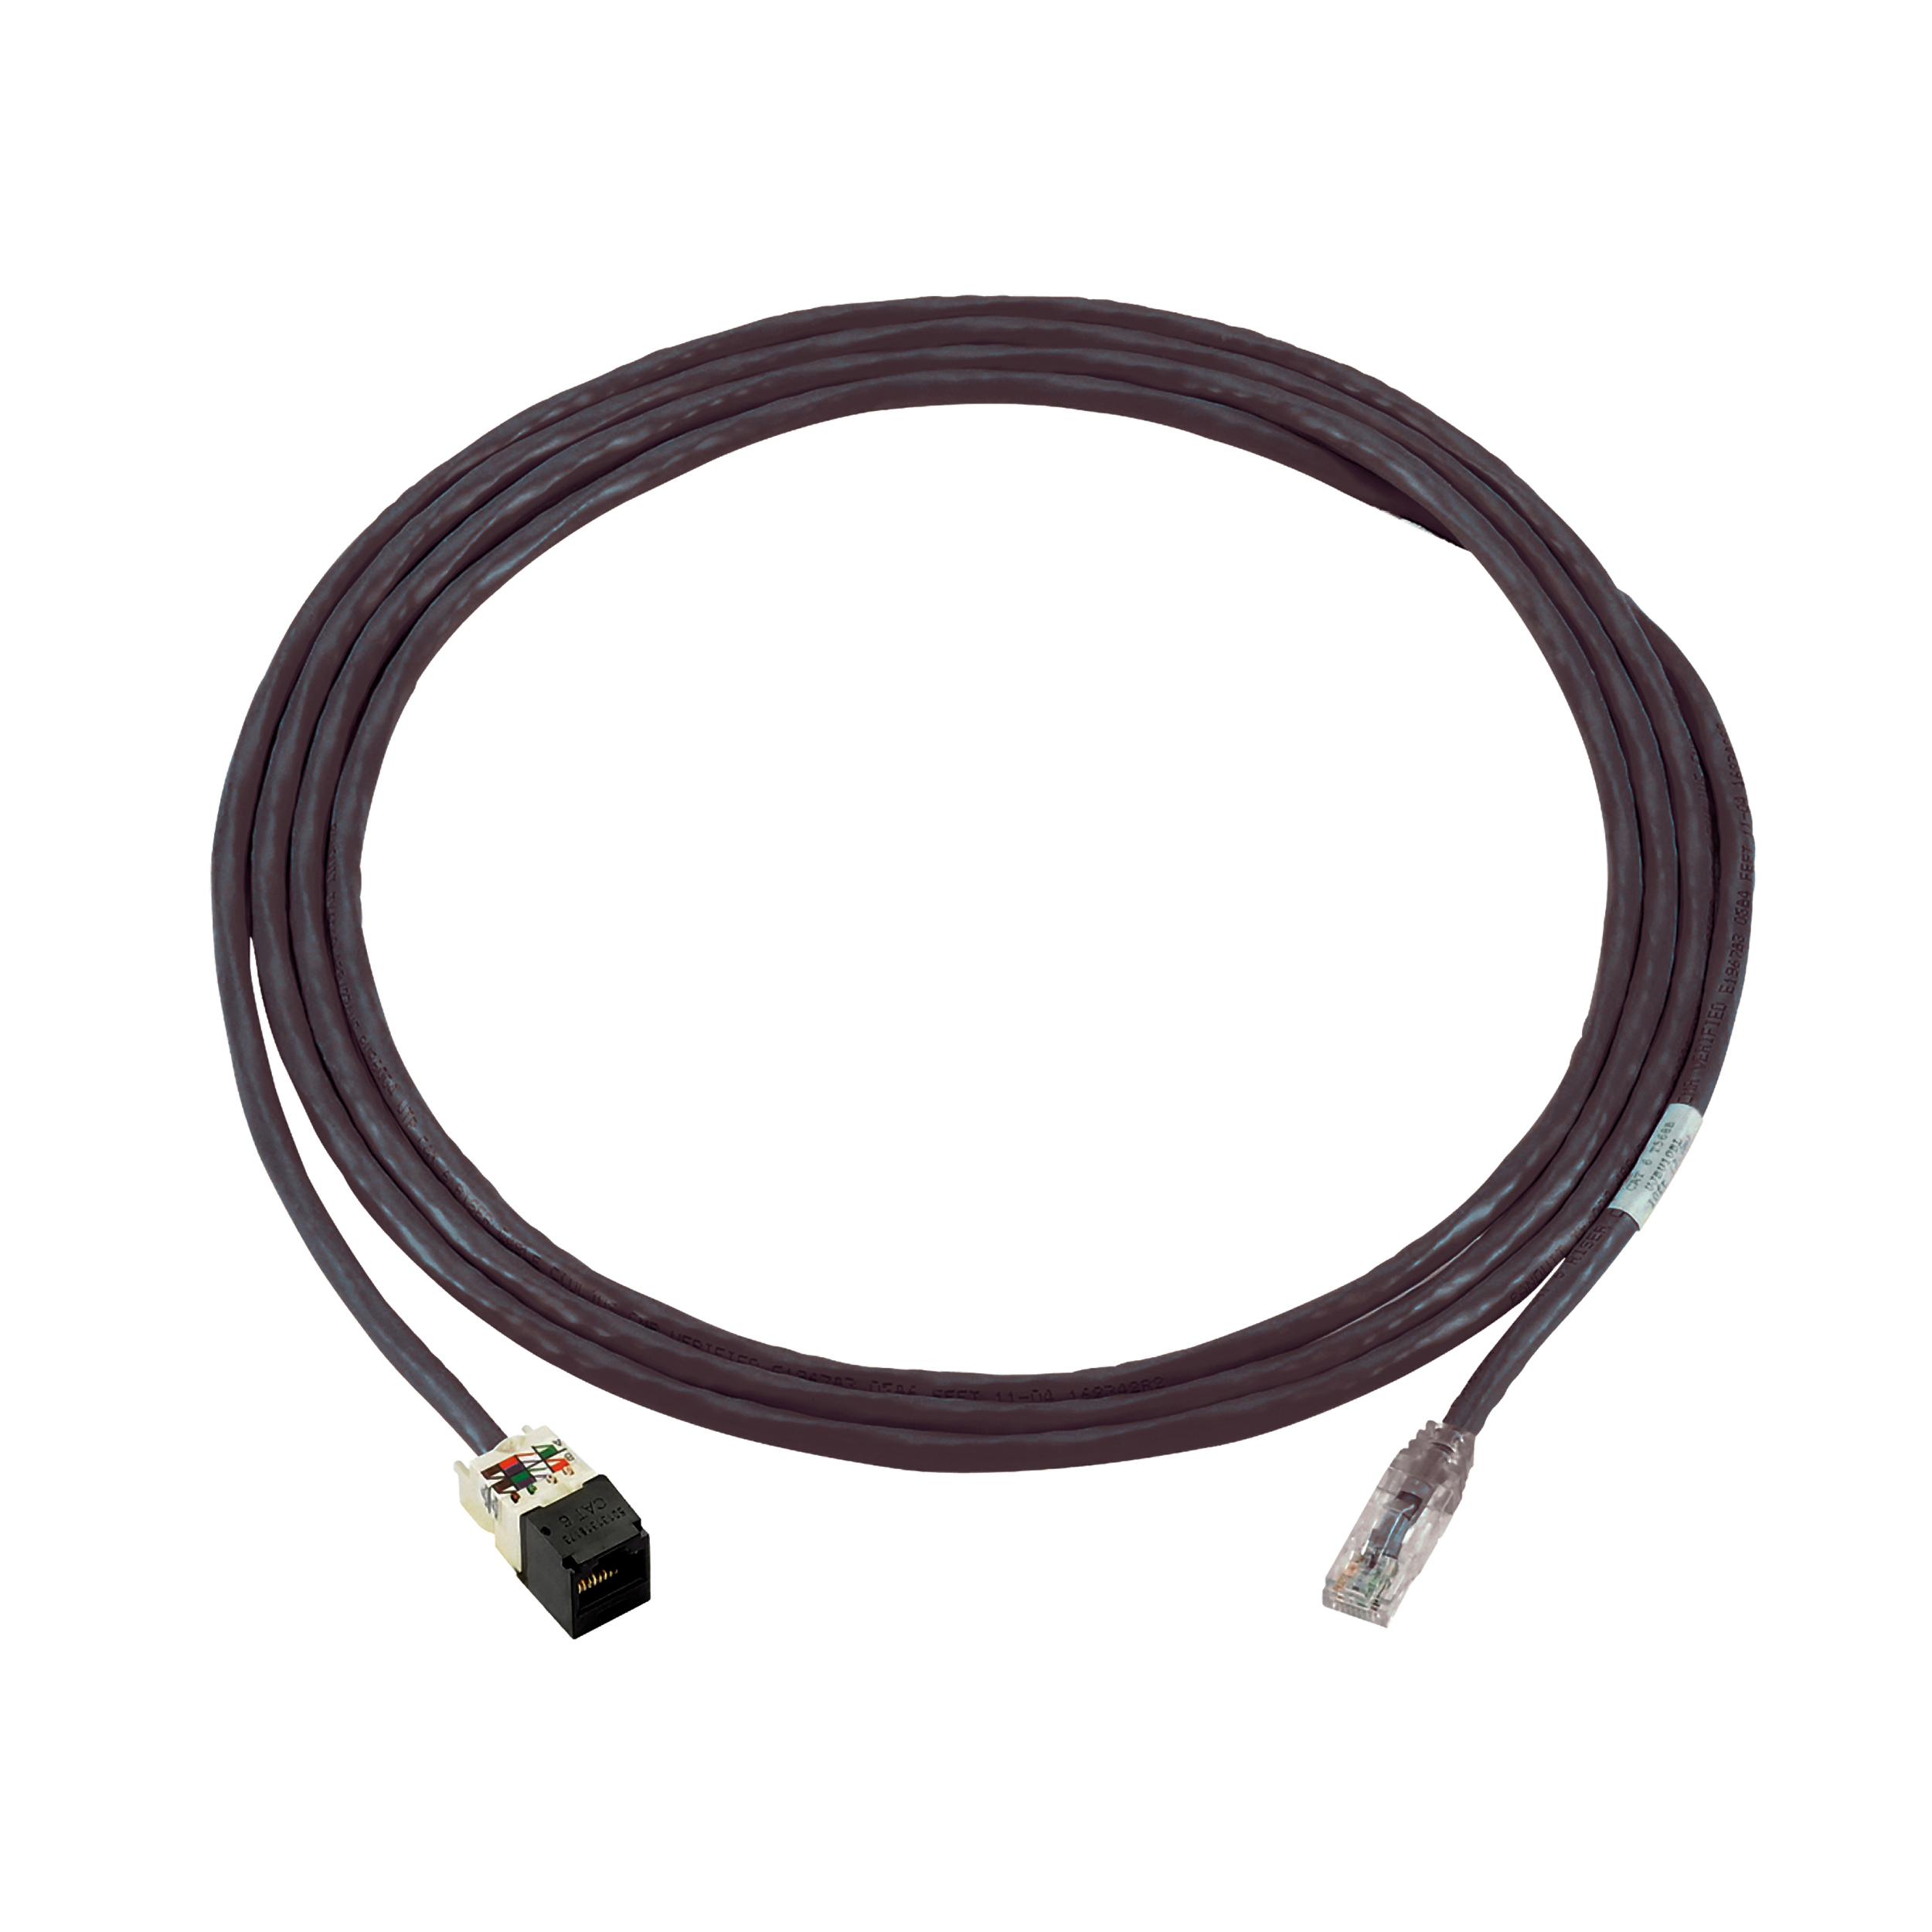 SZ SECURITY HANDLE PATCH CORD (RJ45 FEMALE TO RJ45 MALE)